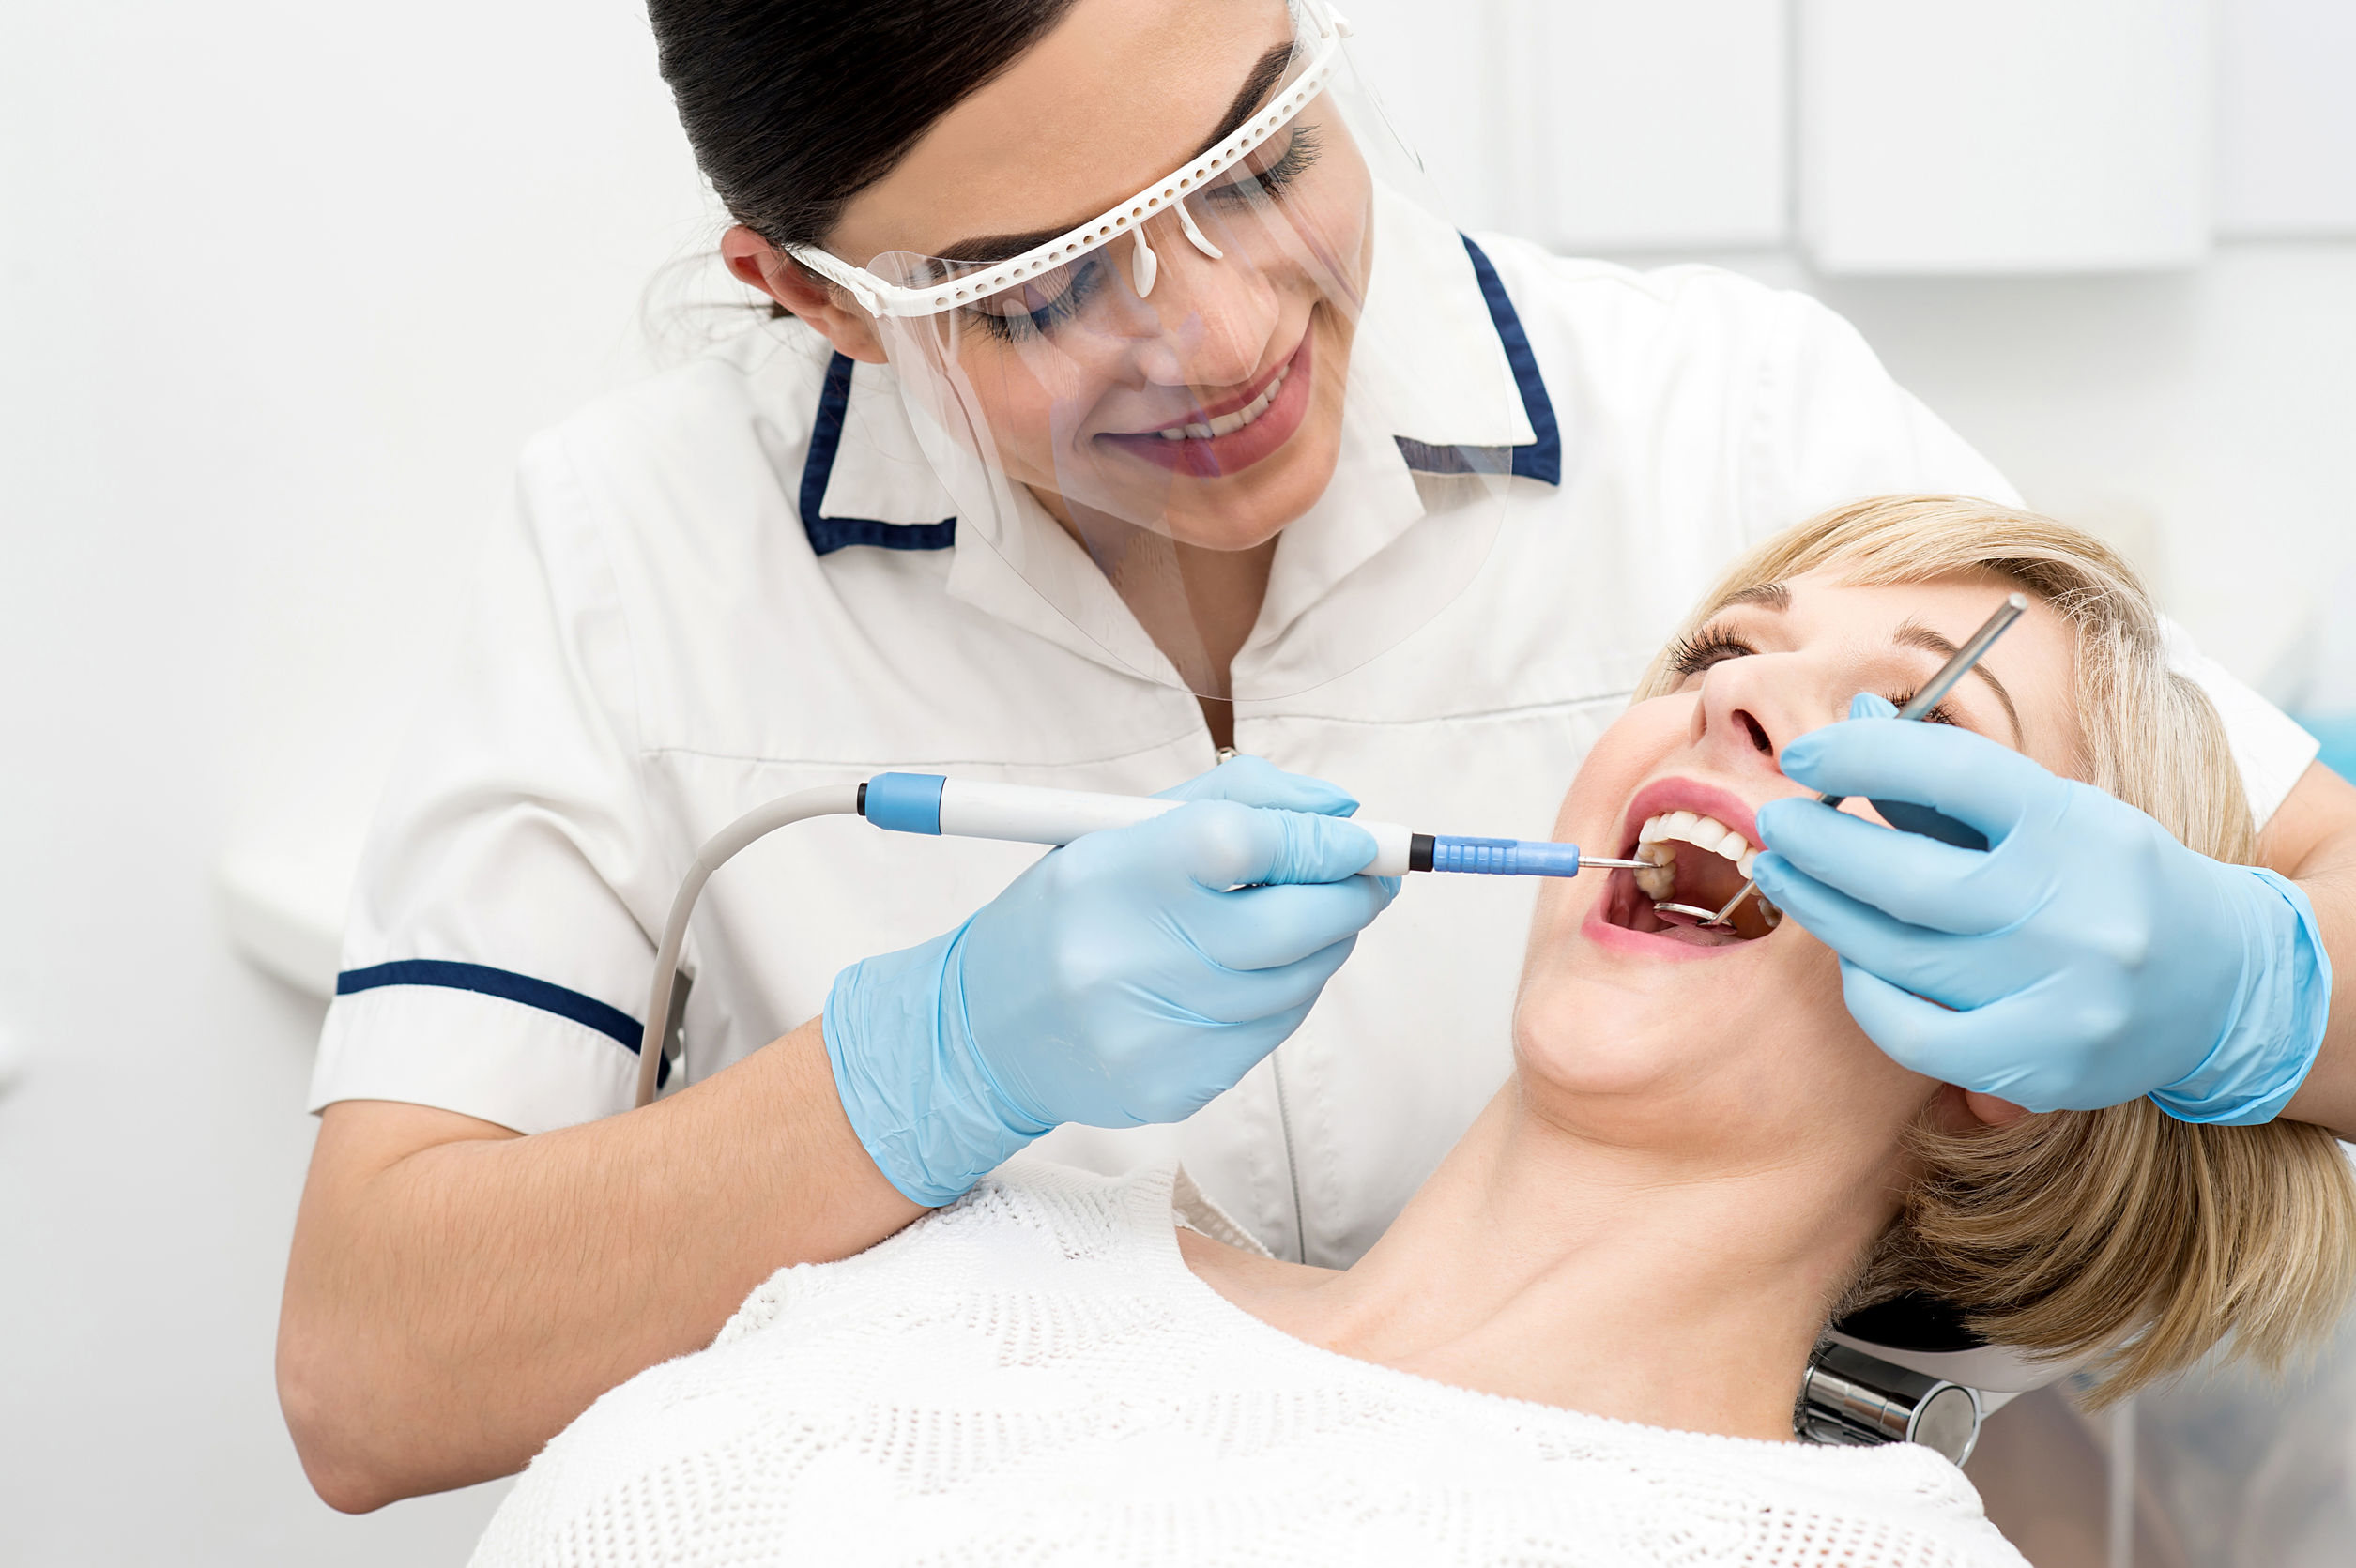 Dentist- Cleaning Patients Teeth